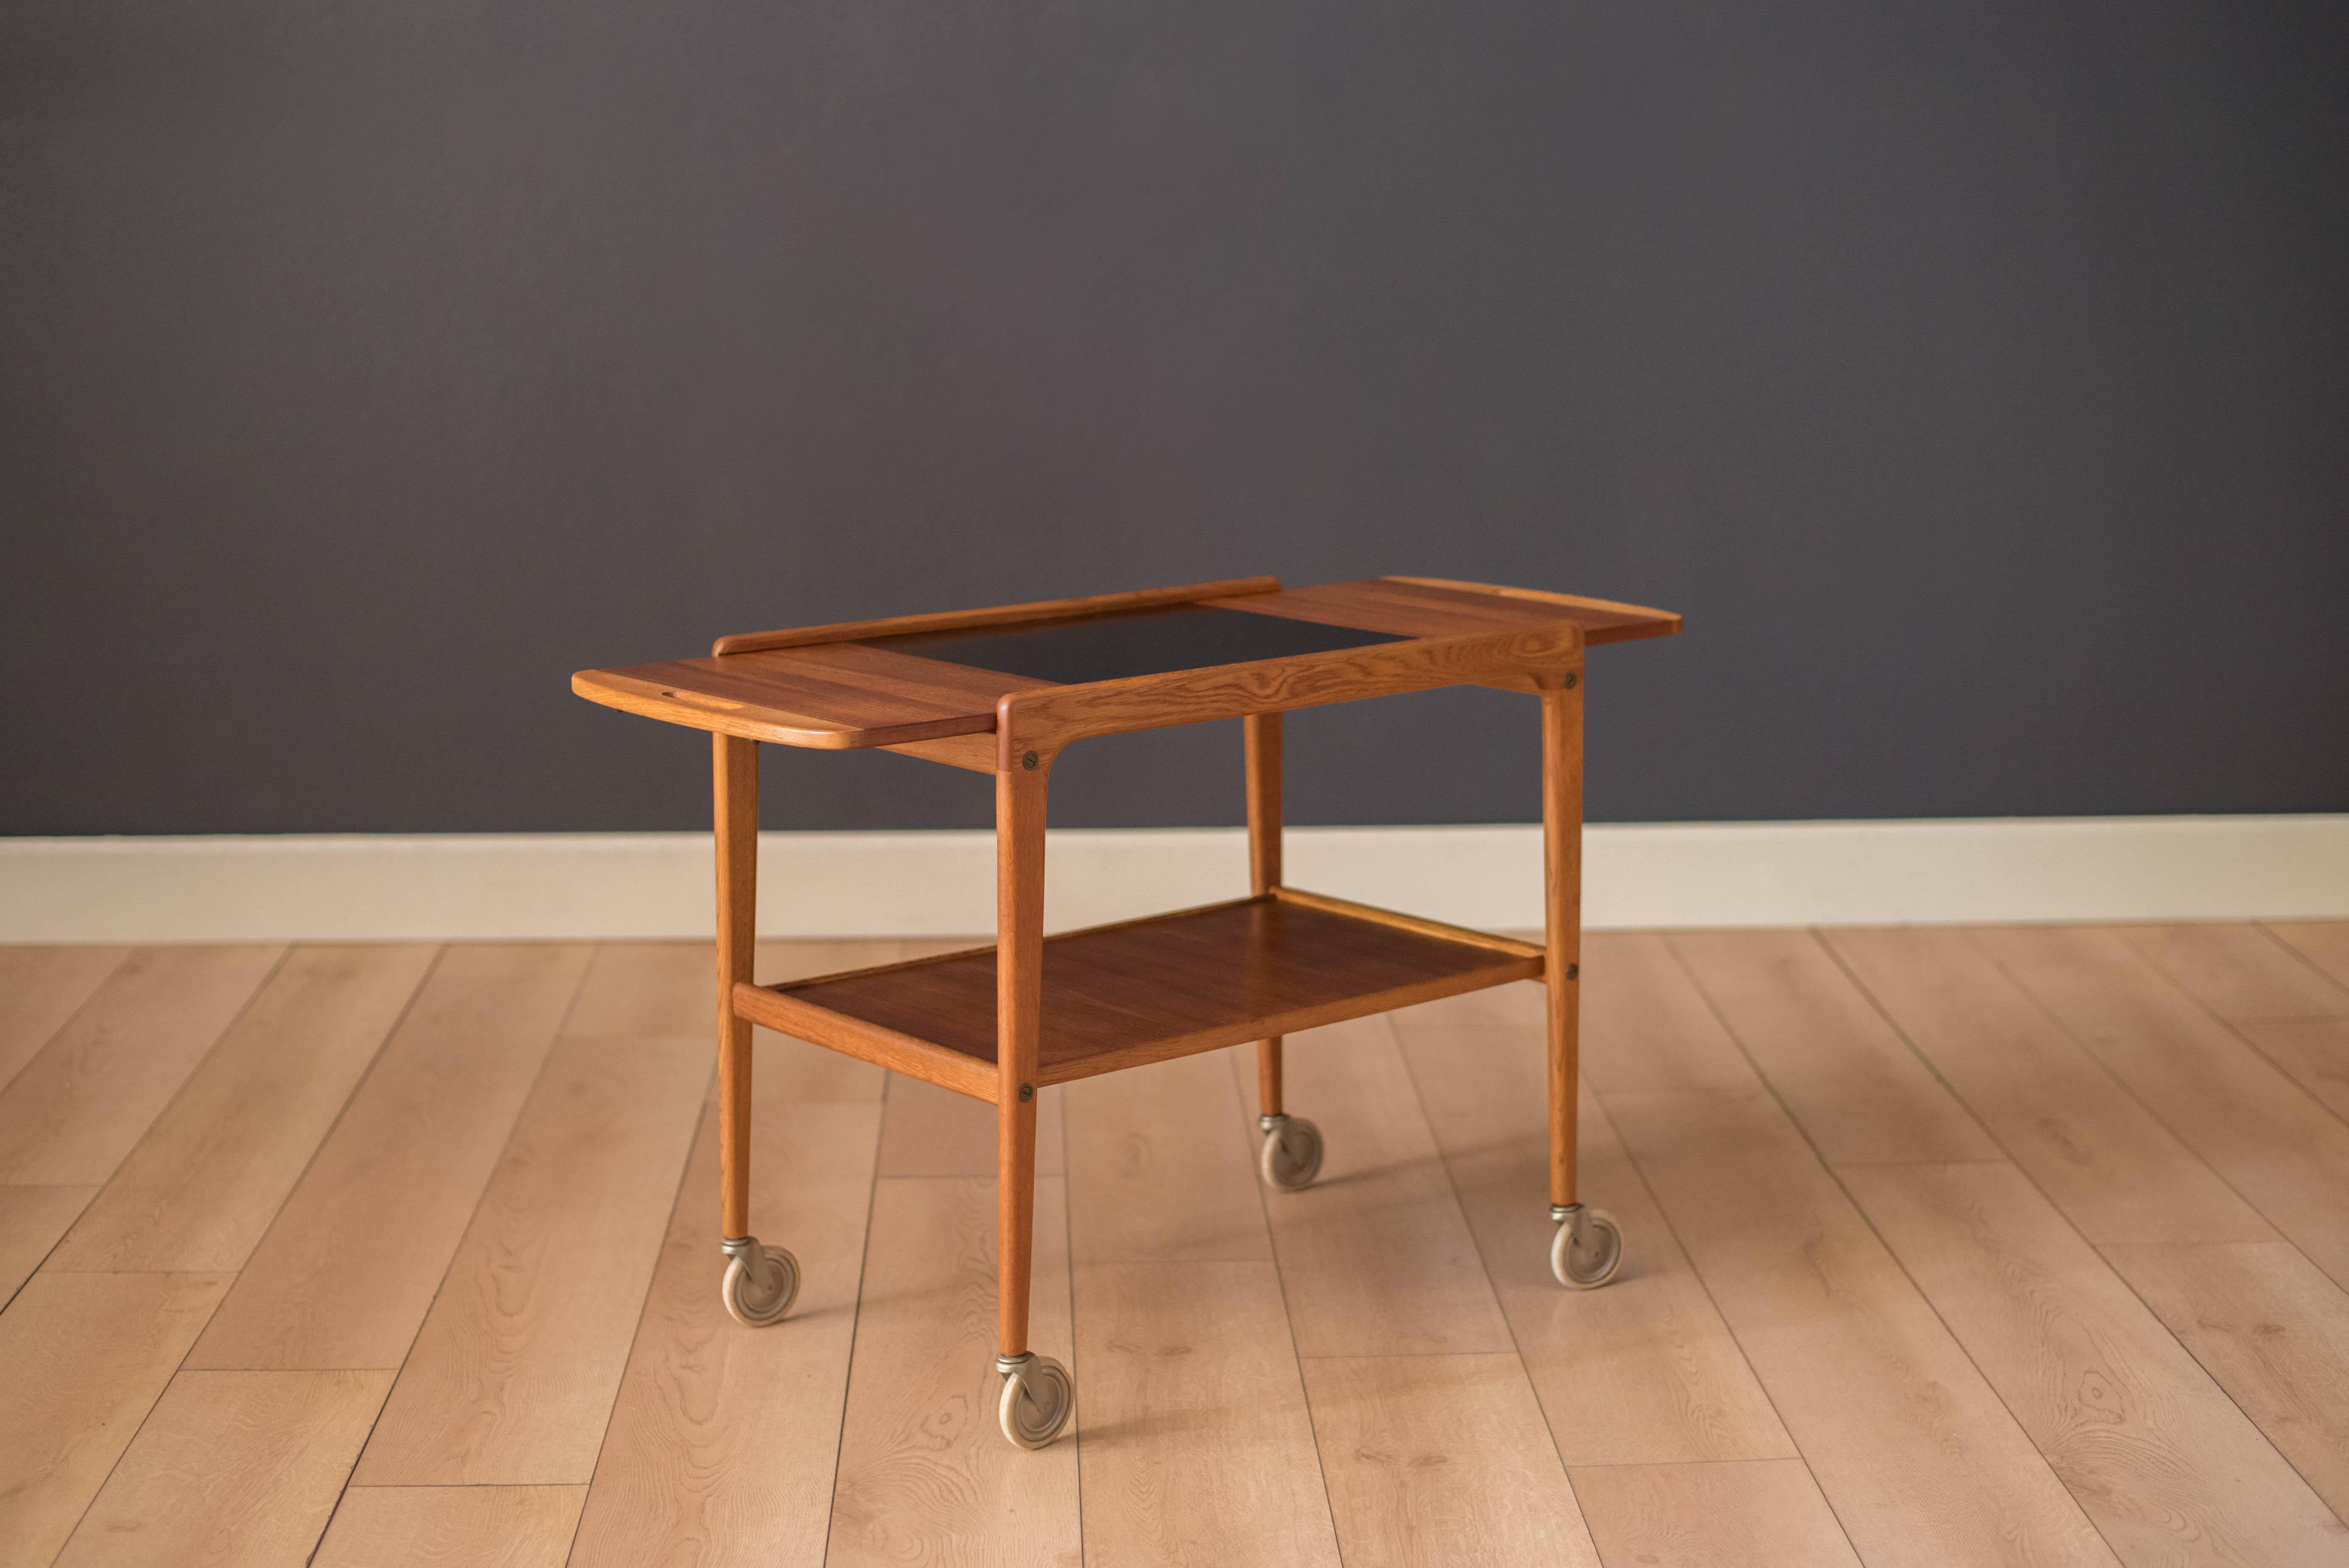 Mid-Century Modern tea or trolley bar cart in teak and oak designed by Yngve Ekstrom, Sweden. This versatile piece is equipped with a drop leaf that slides to extend for more serving space. Features an easy to maintain black laminate top and two